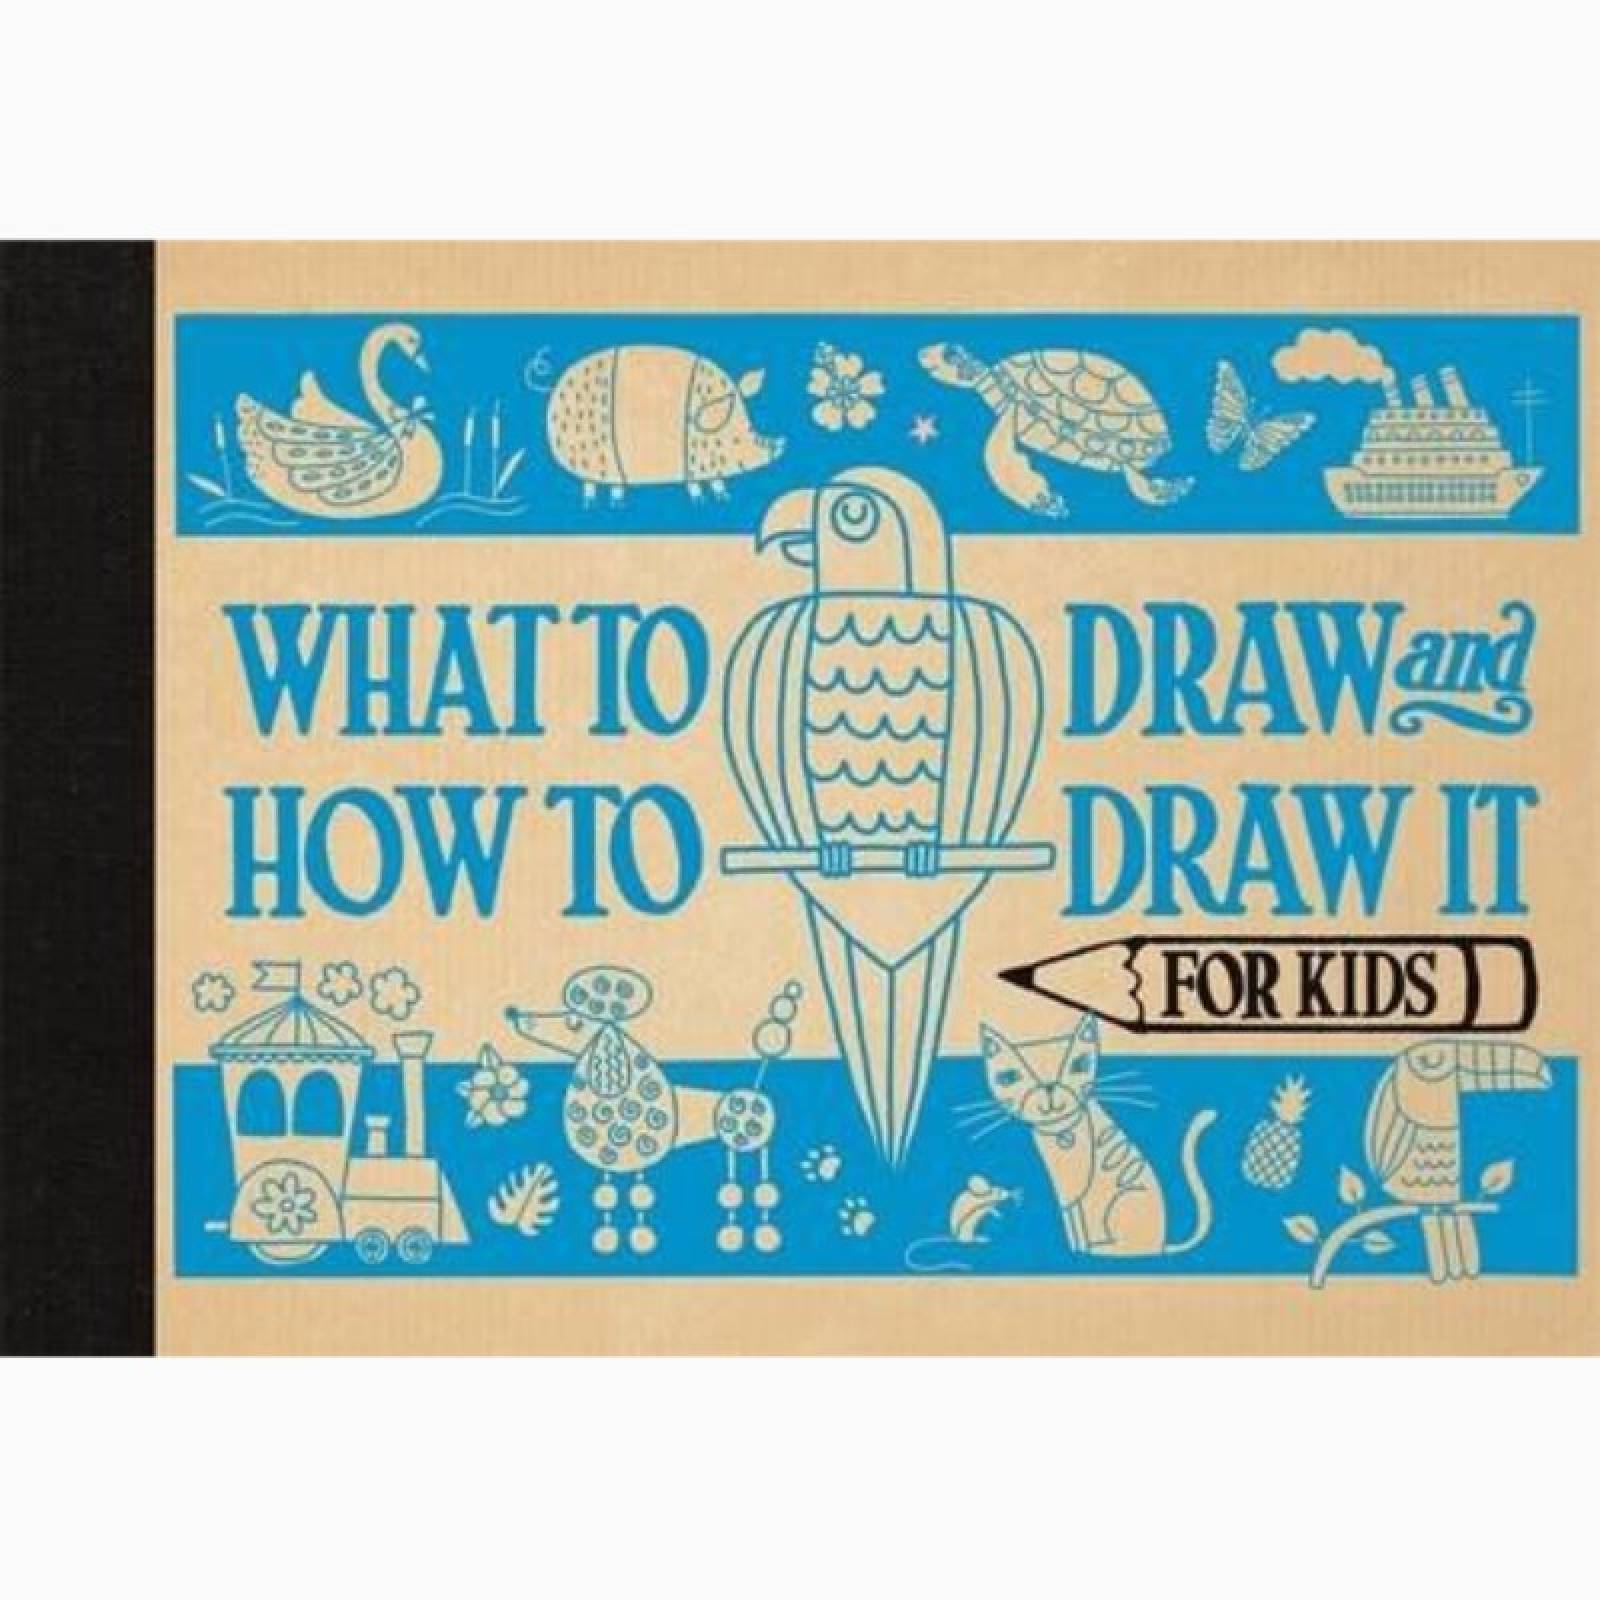 What To Draw And How to Draw It For Kids - Hardback Book